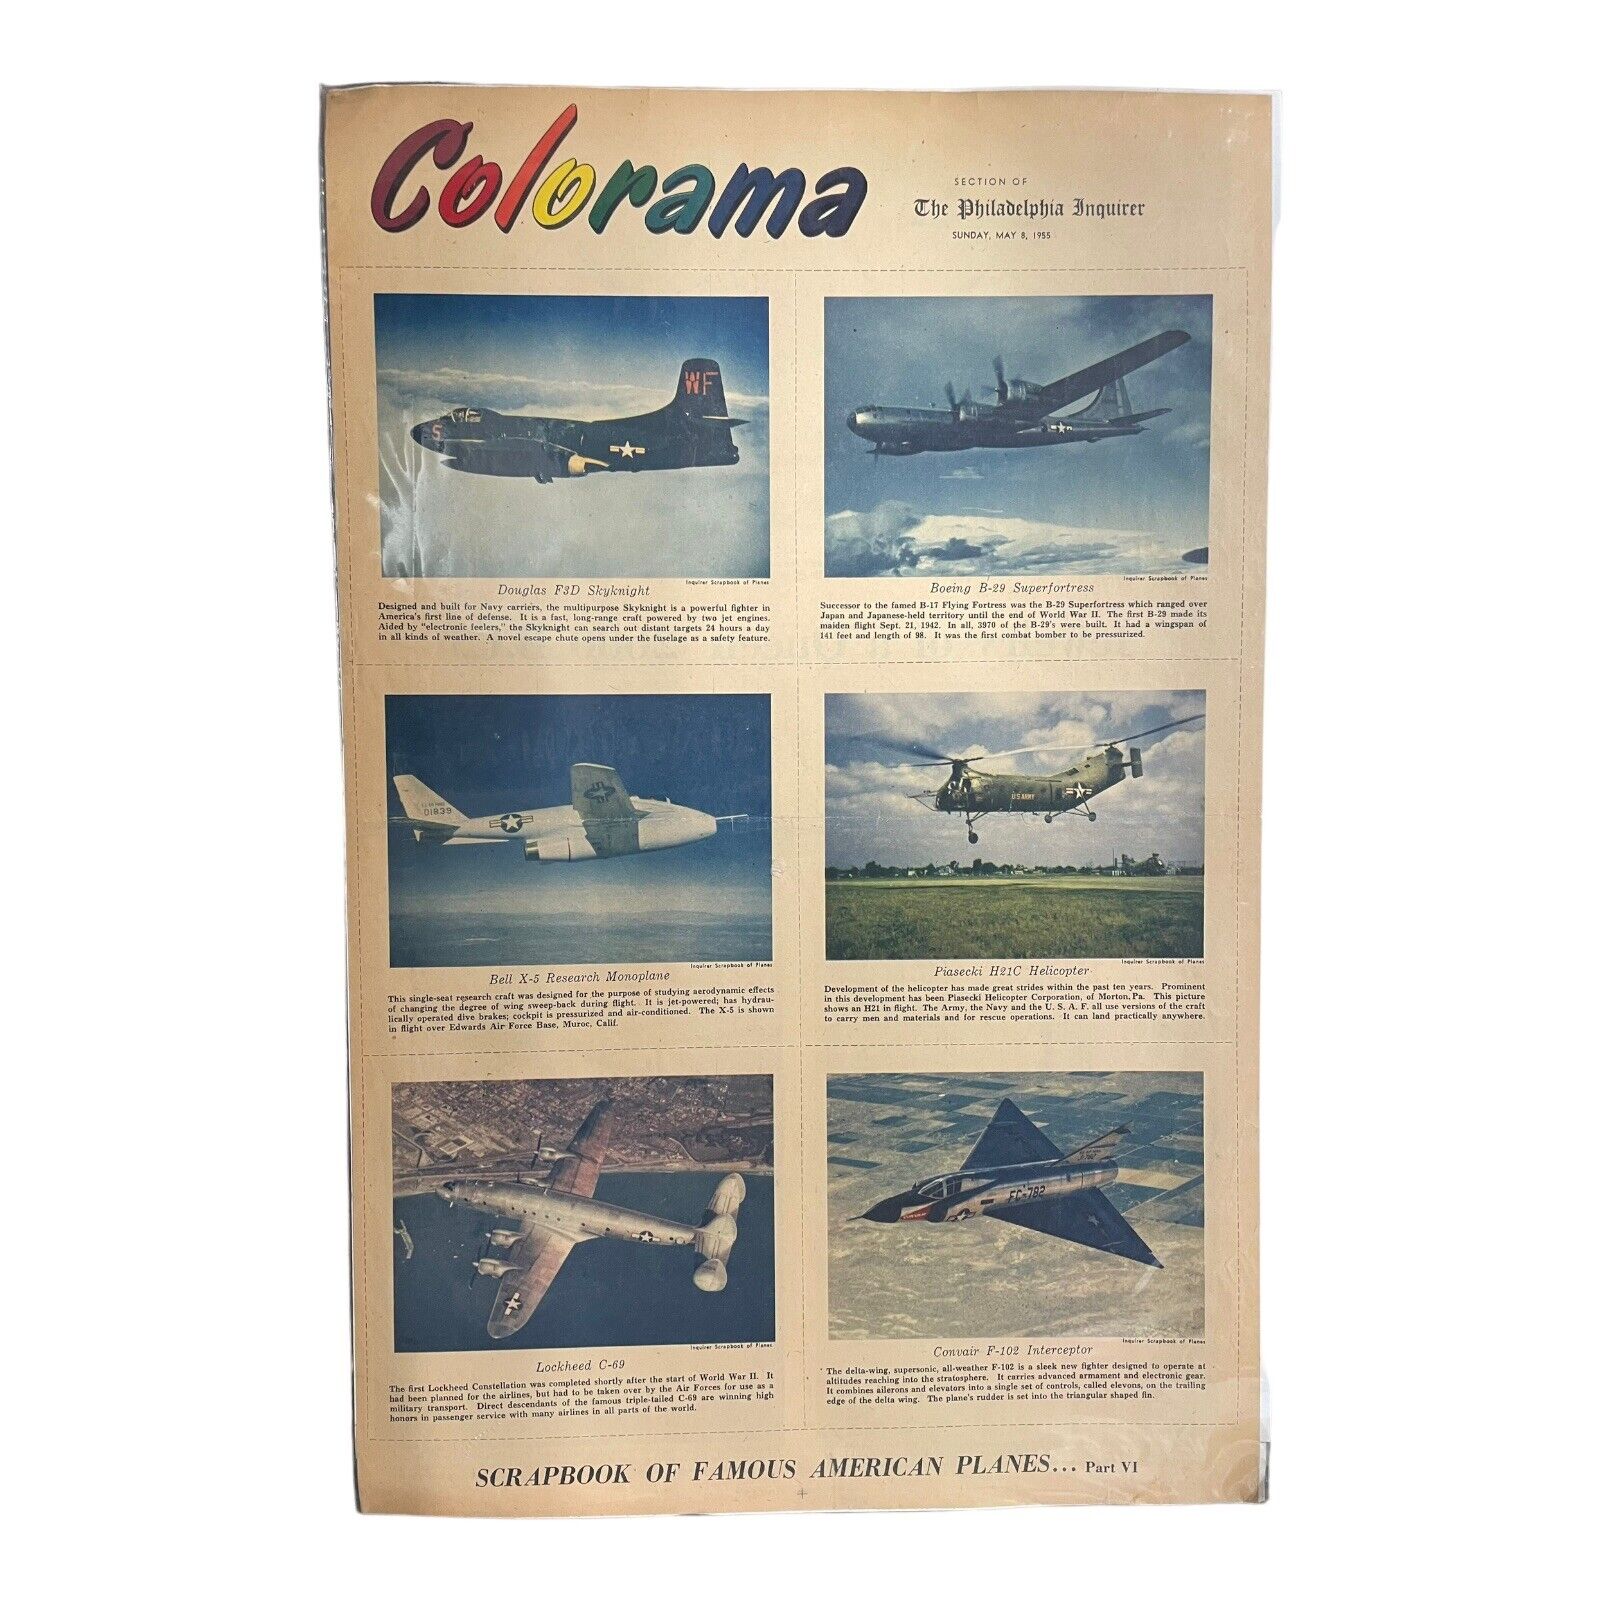 The Philadelphia Inquirer Colorama May 8 1955 Scrapbook Of Famous American Plane